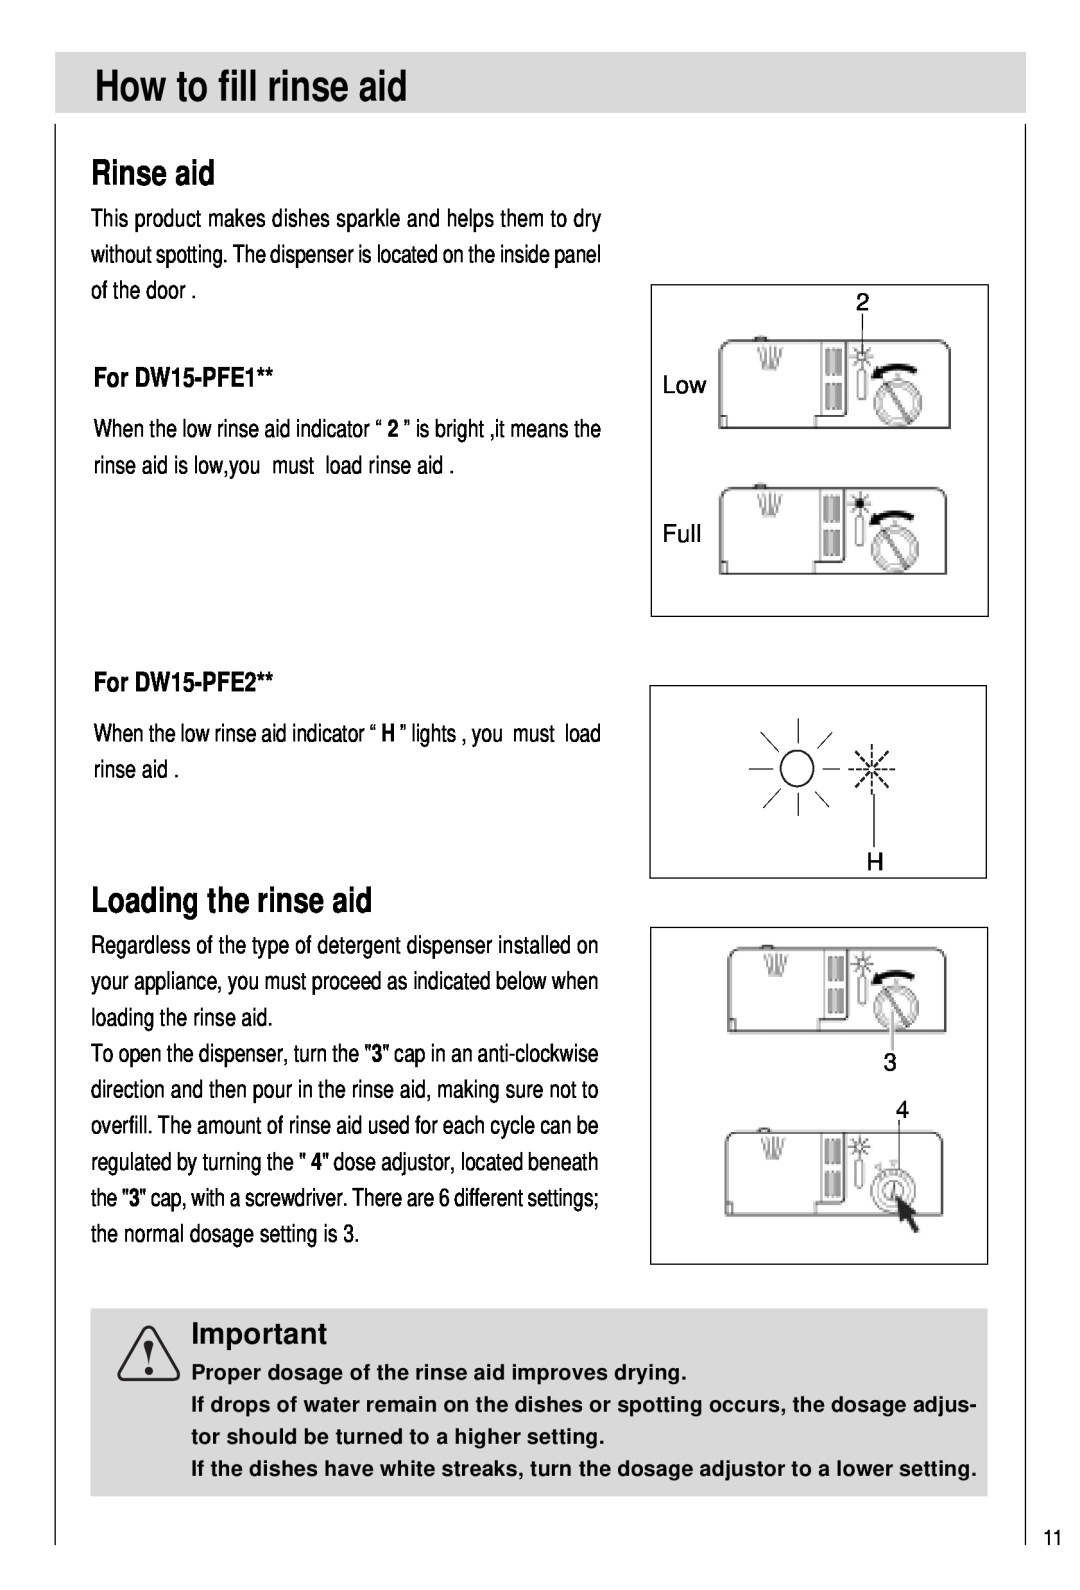 Haier manual How to fill rinse aid, Rinse aid, Loading the rinse aid, For DW15-PFE1, For DW15-PFE2 